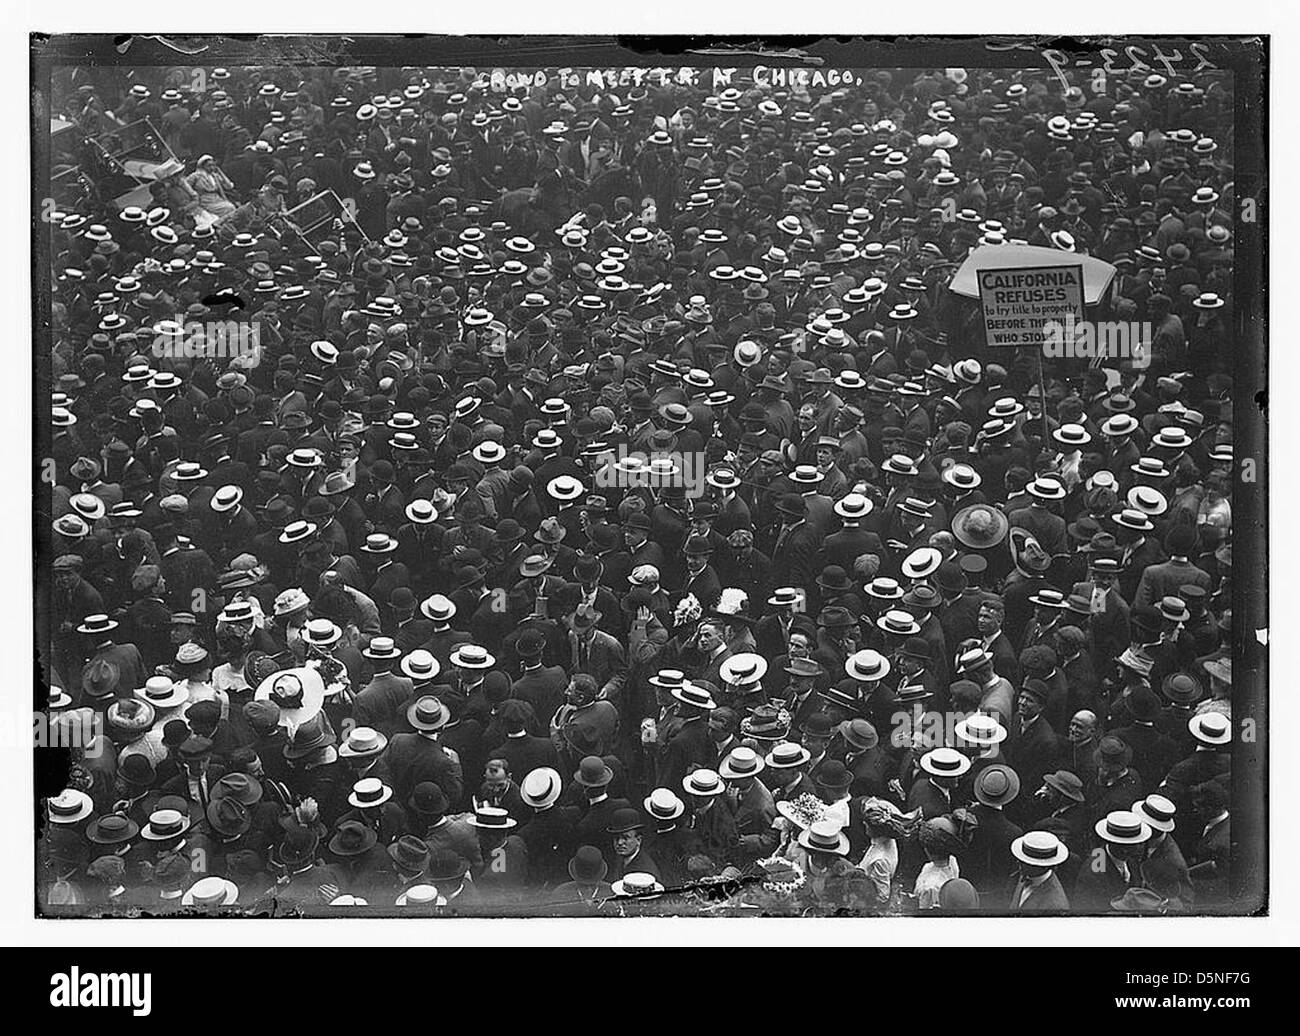 Crowd to meet T.R. [Theodore Roosevelt] at Chicago (LOC) Stock Photo